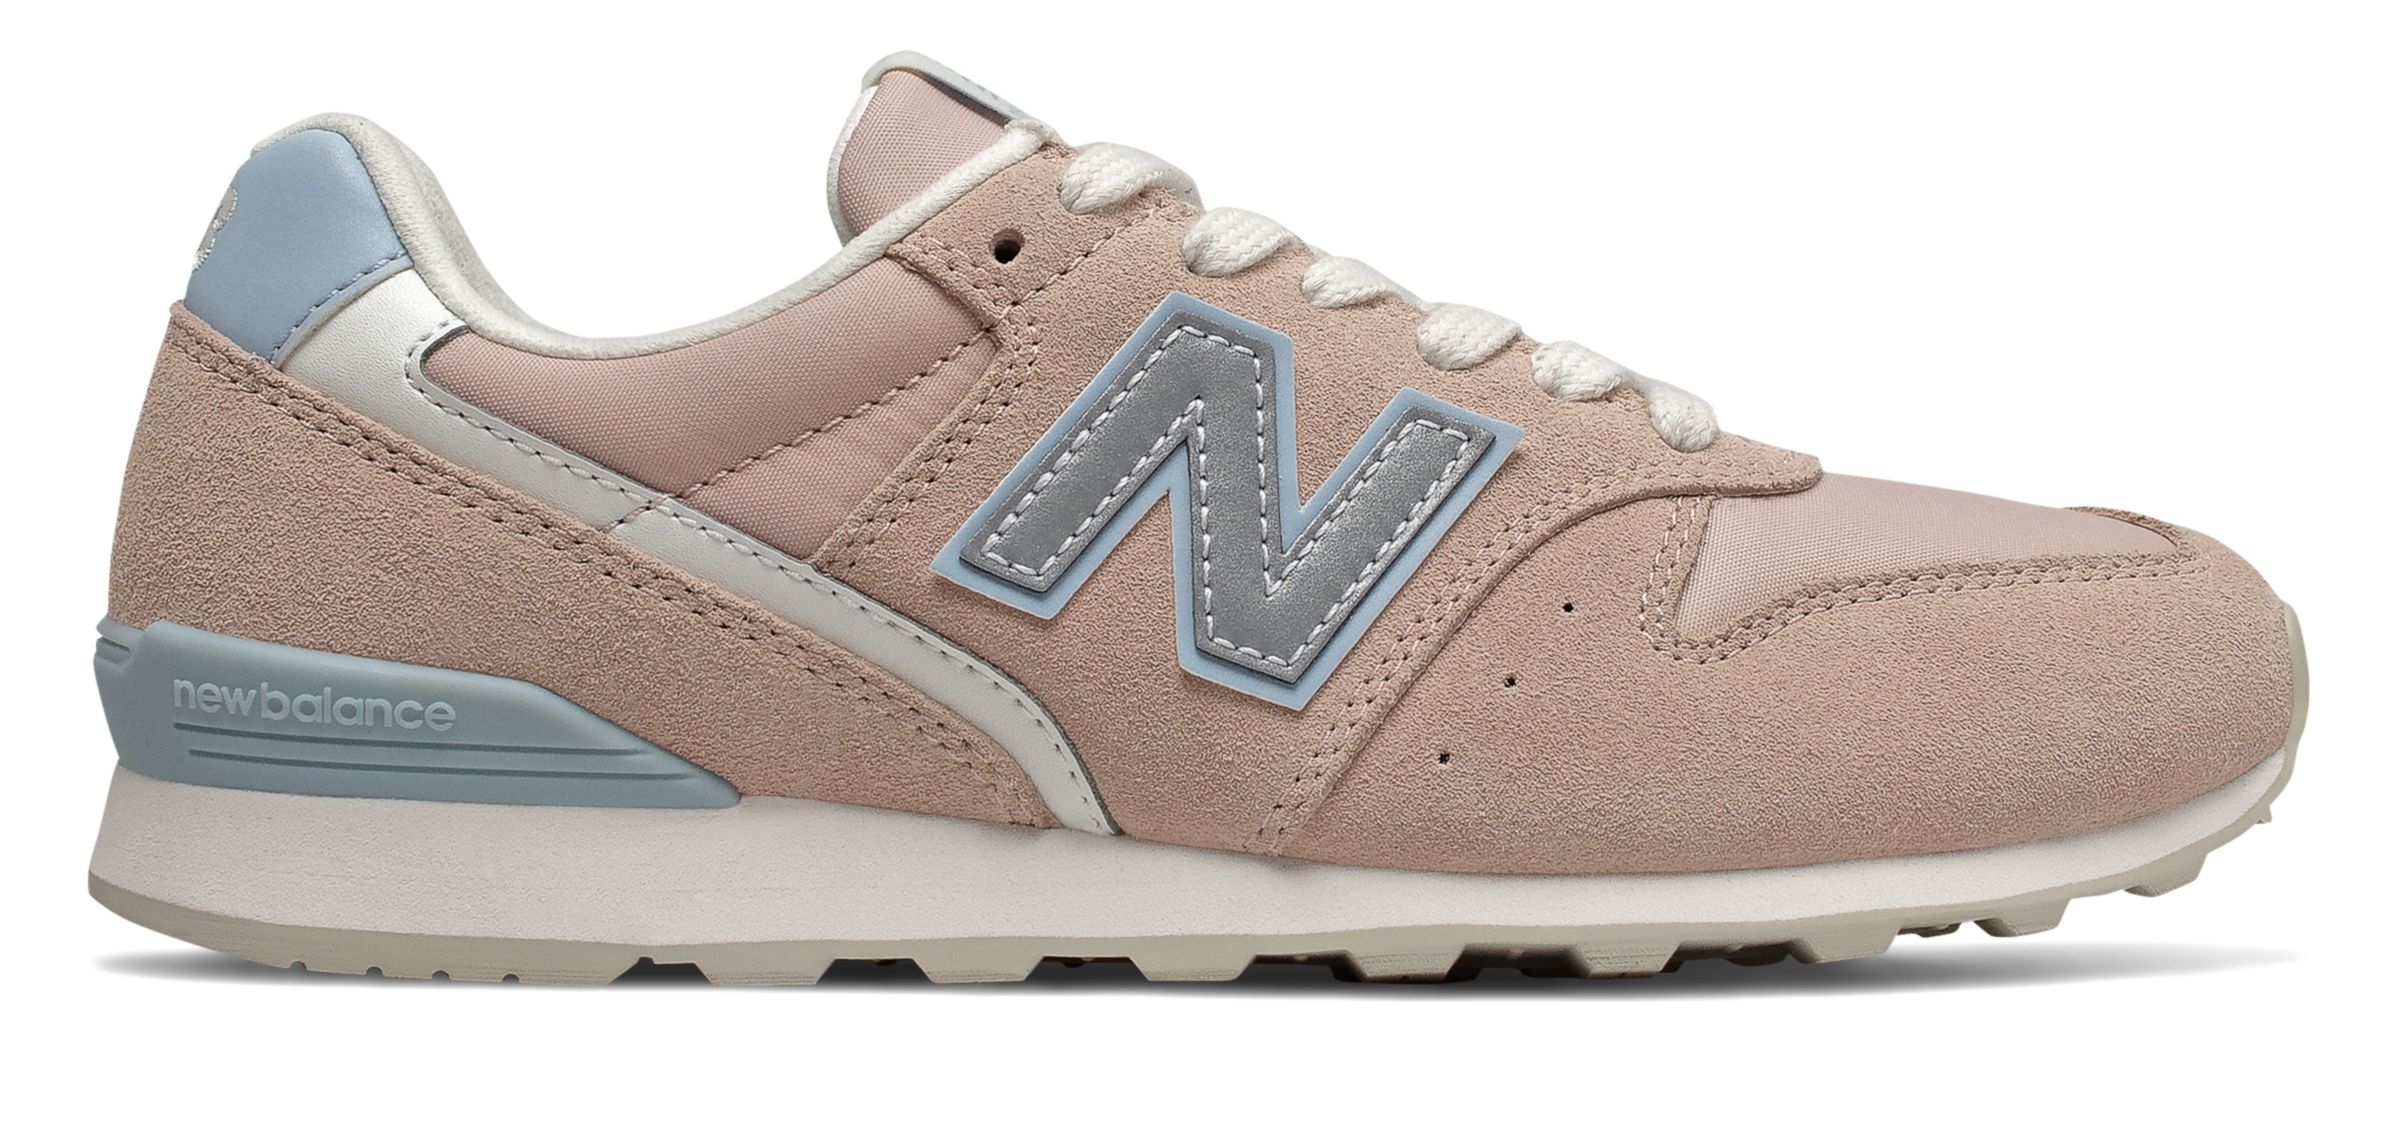 difference between new balance 420 and 620